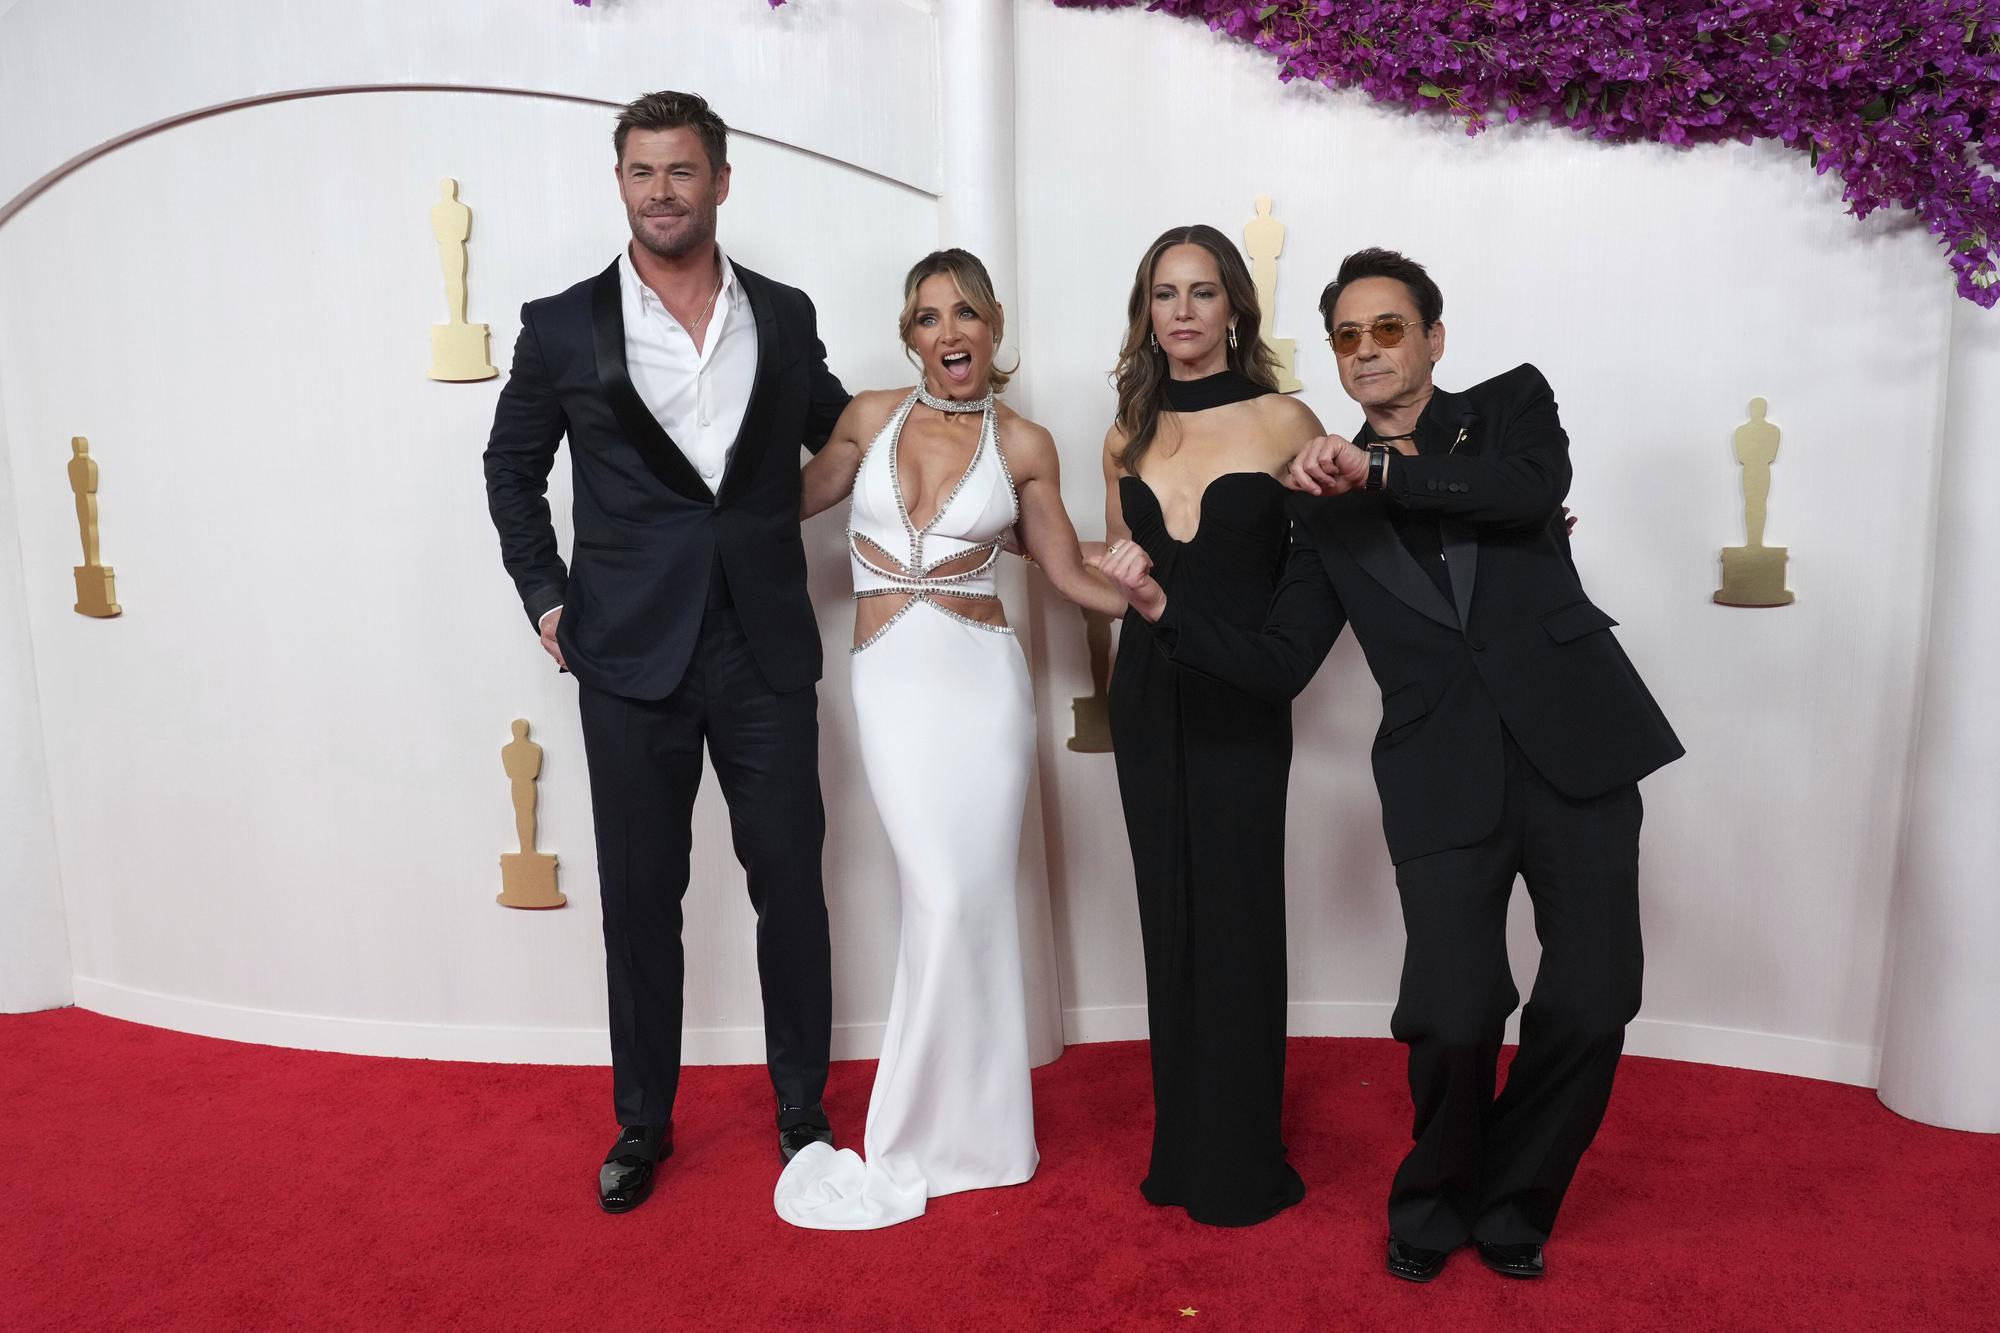 Chris Hemsworth, from left, Elsa Pataky, Susan Downey, and Robert Downey Jr. arrive at the Oscars on Sunday, March 10, 2024, at the Dolby Theatre in Los Angeles. (Photo by Jordan Strauss/Invision/AP) Associated Press/LaPresse Only Italy and Spain / EDITORIAL USE ONLY/ONLY ITALY AND SPAIN